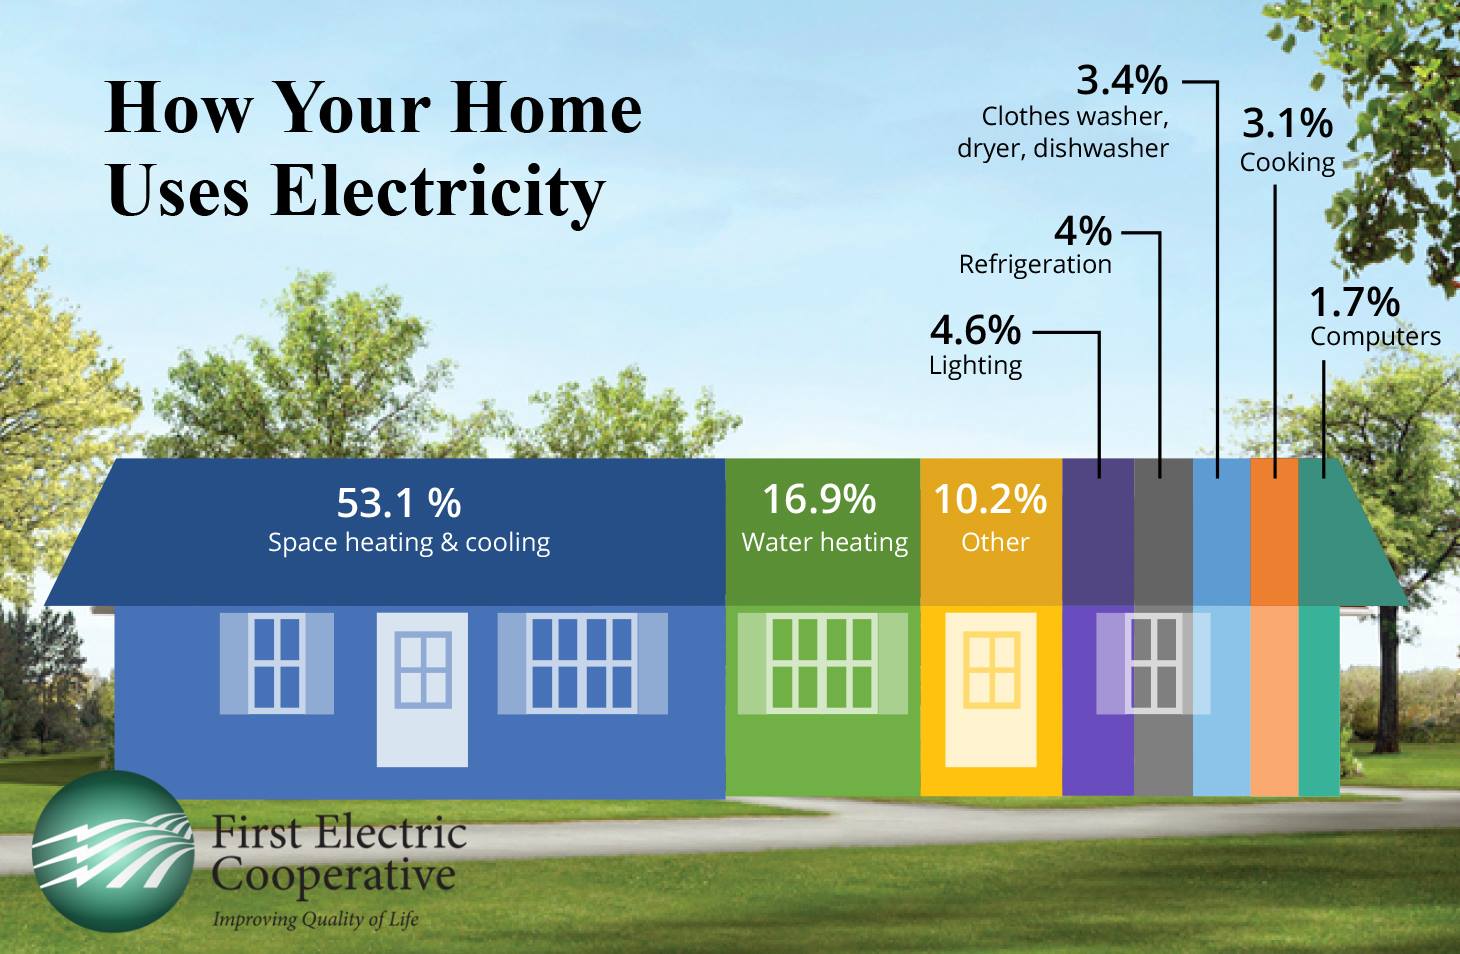 Image of typical home electric usage broken down into percentages of the home